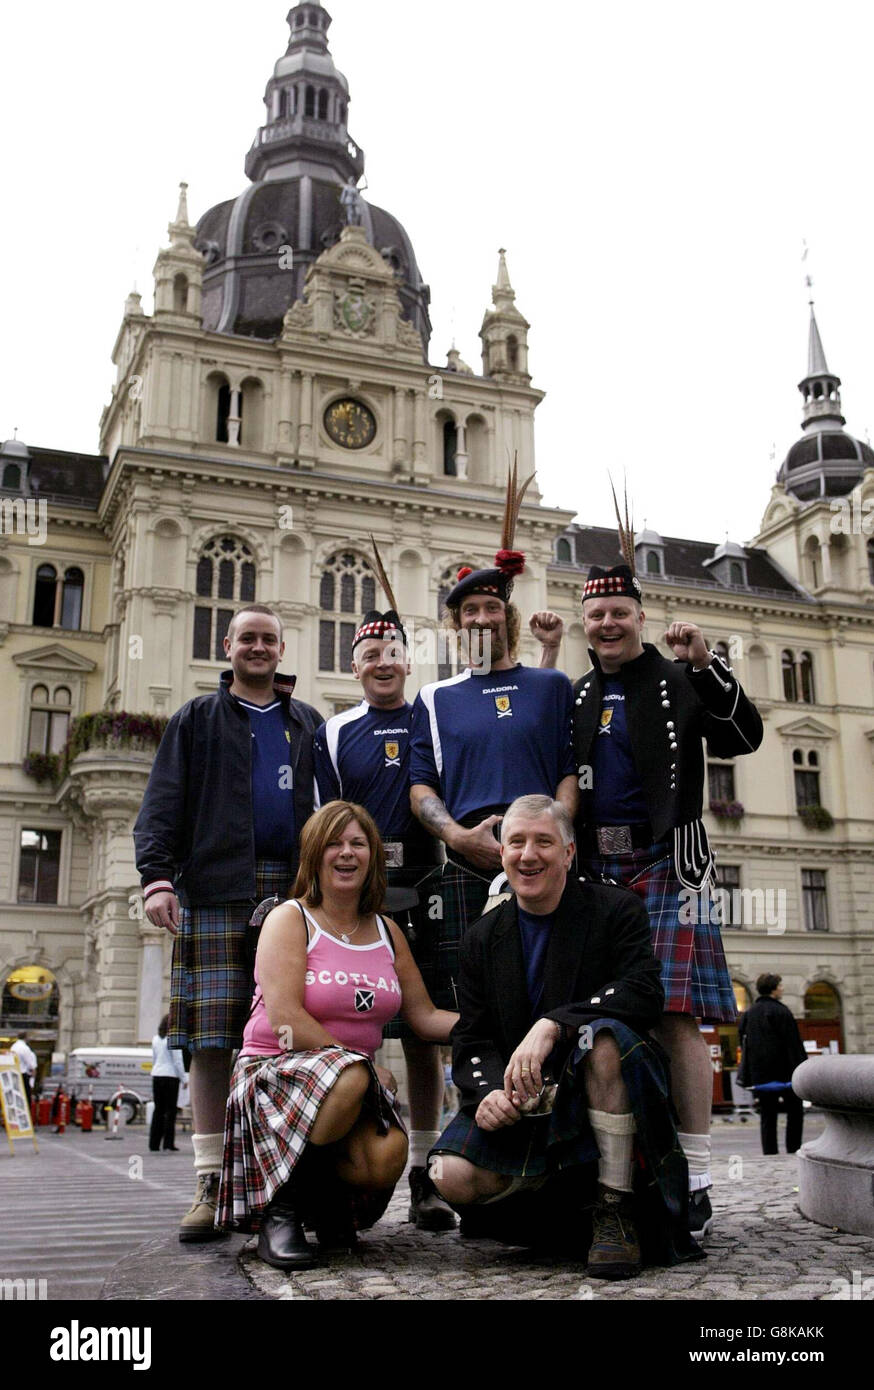 Scotland fans Davy Stouty (top right) with friends from Falkirk and Dundee, outside the Rathus (local govenment building), ahead of Scotland's friendly international match against Austria. Stock Photo